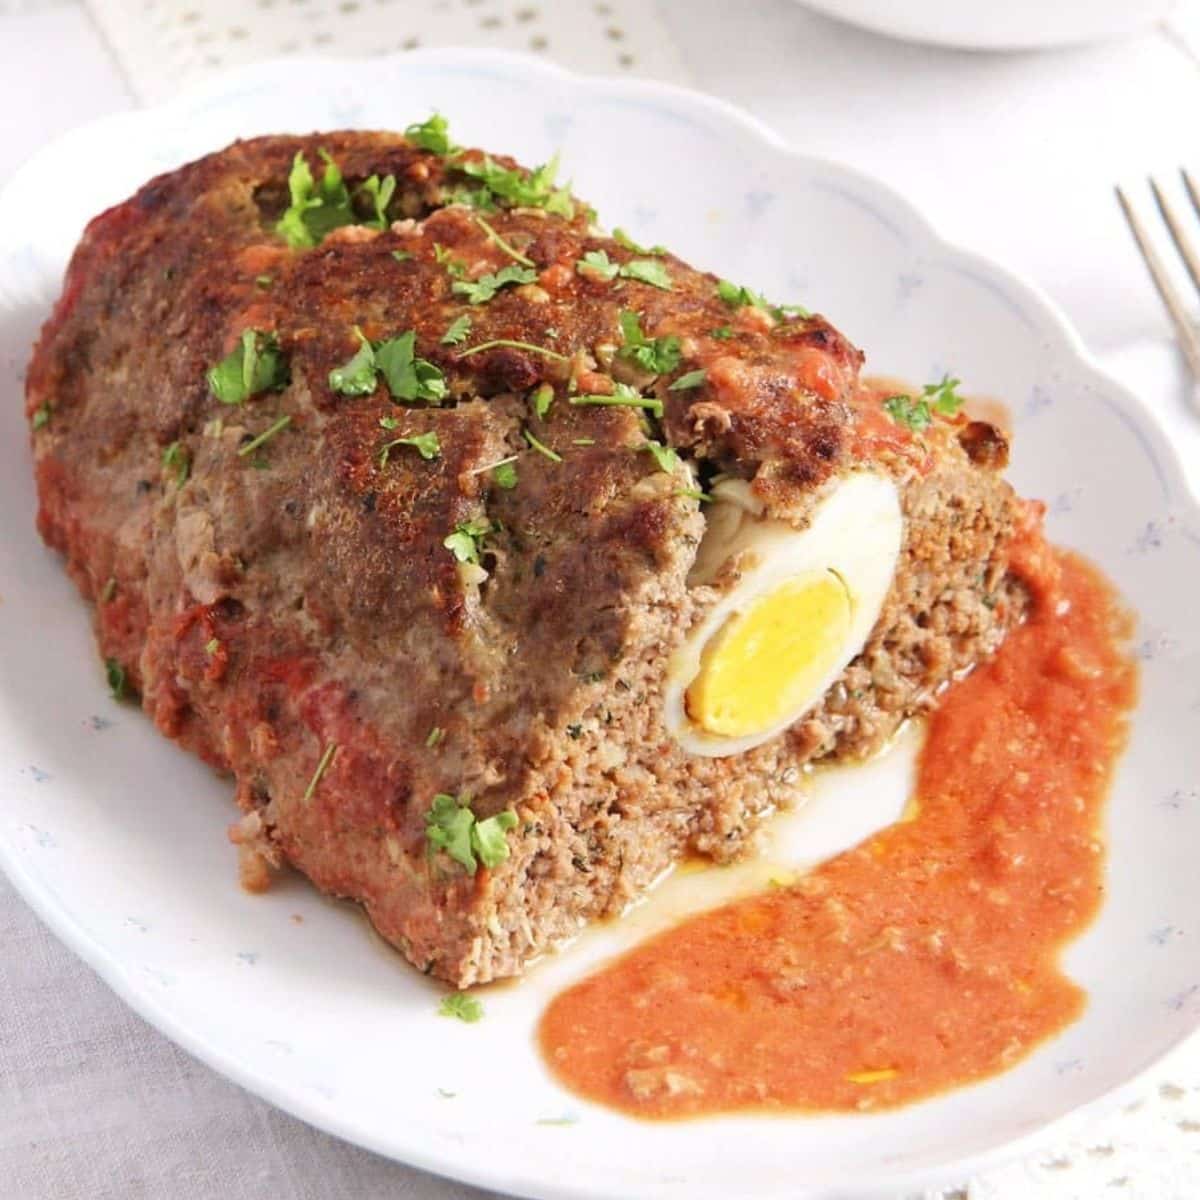 meatloaf with eggs cut to show the egg inside with sauce on a platter.